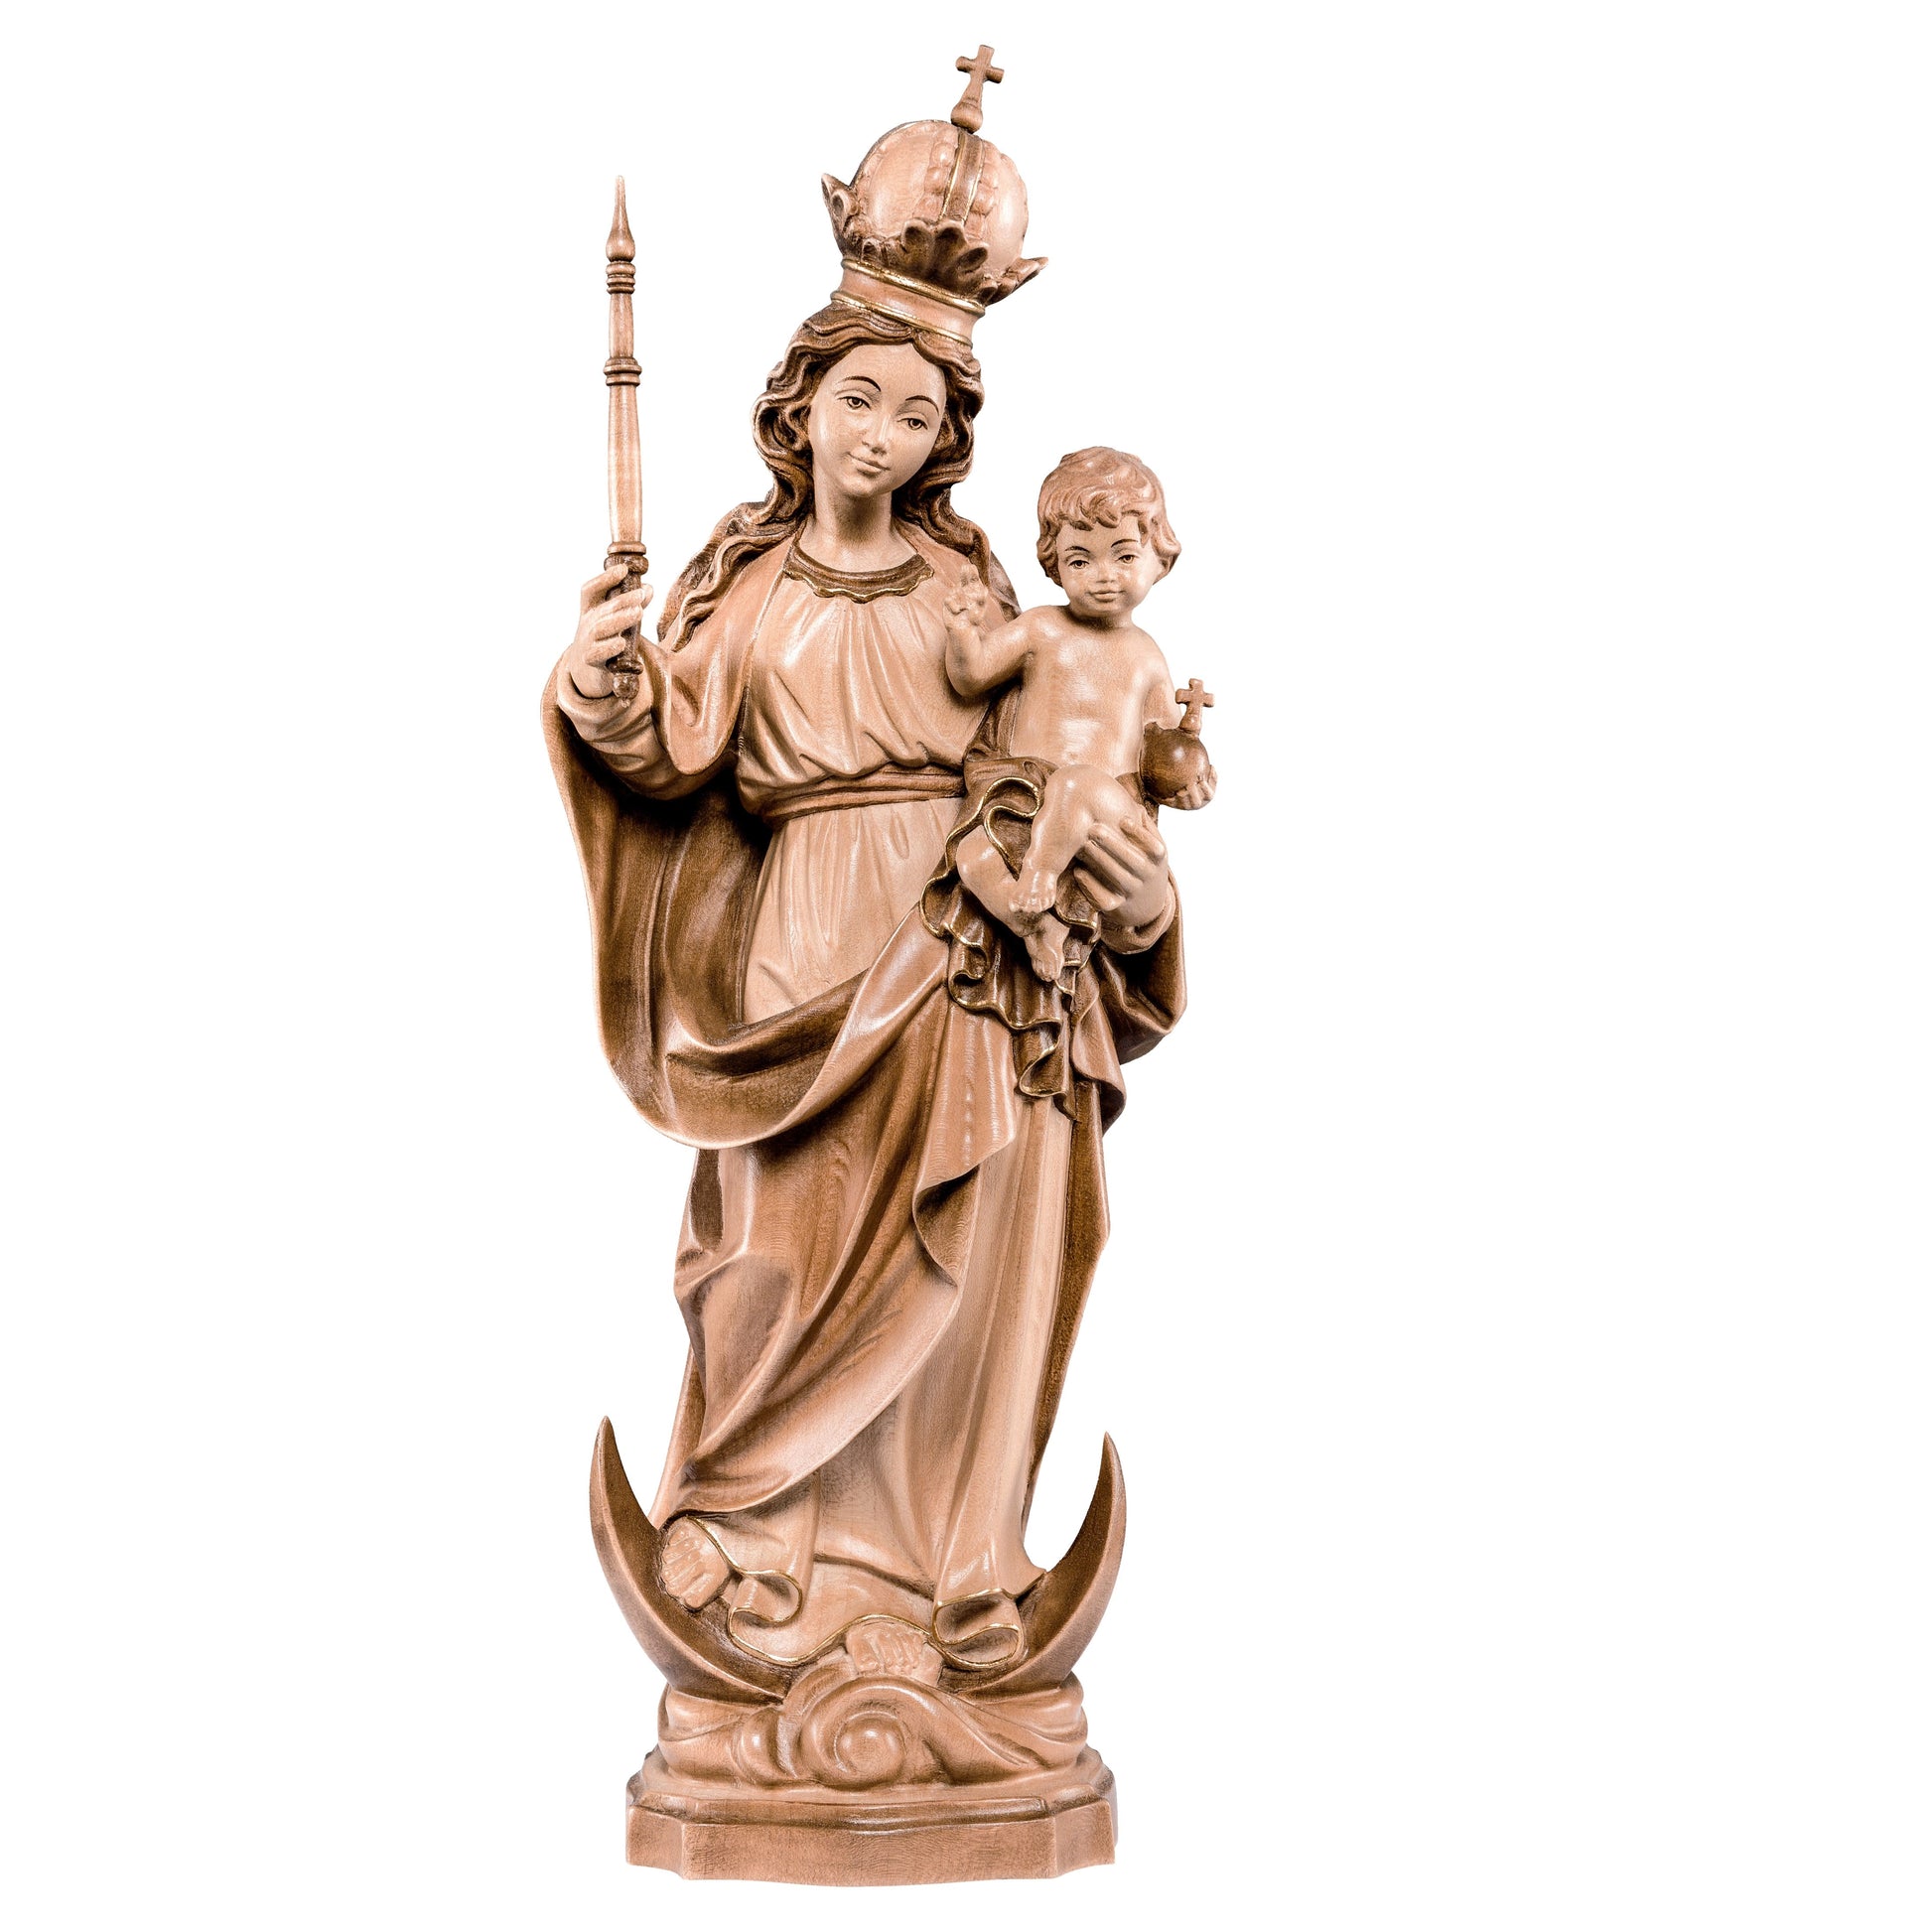 MONDO CATTOLICO Glossy / 15 cm (5.9 in) Wooden statue of Patron saint of Bavaria